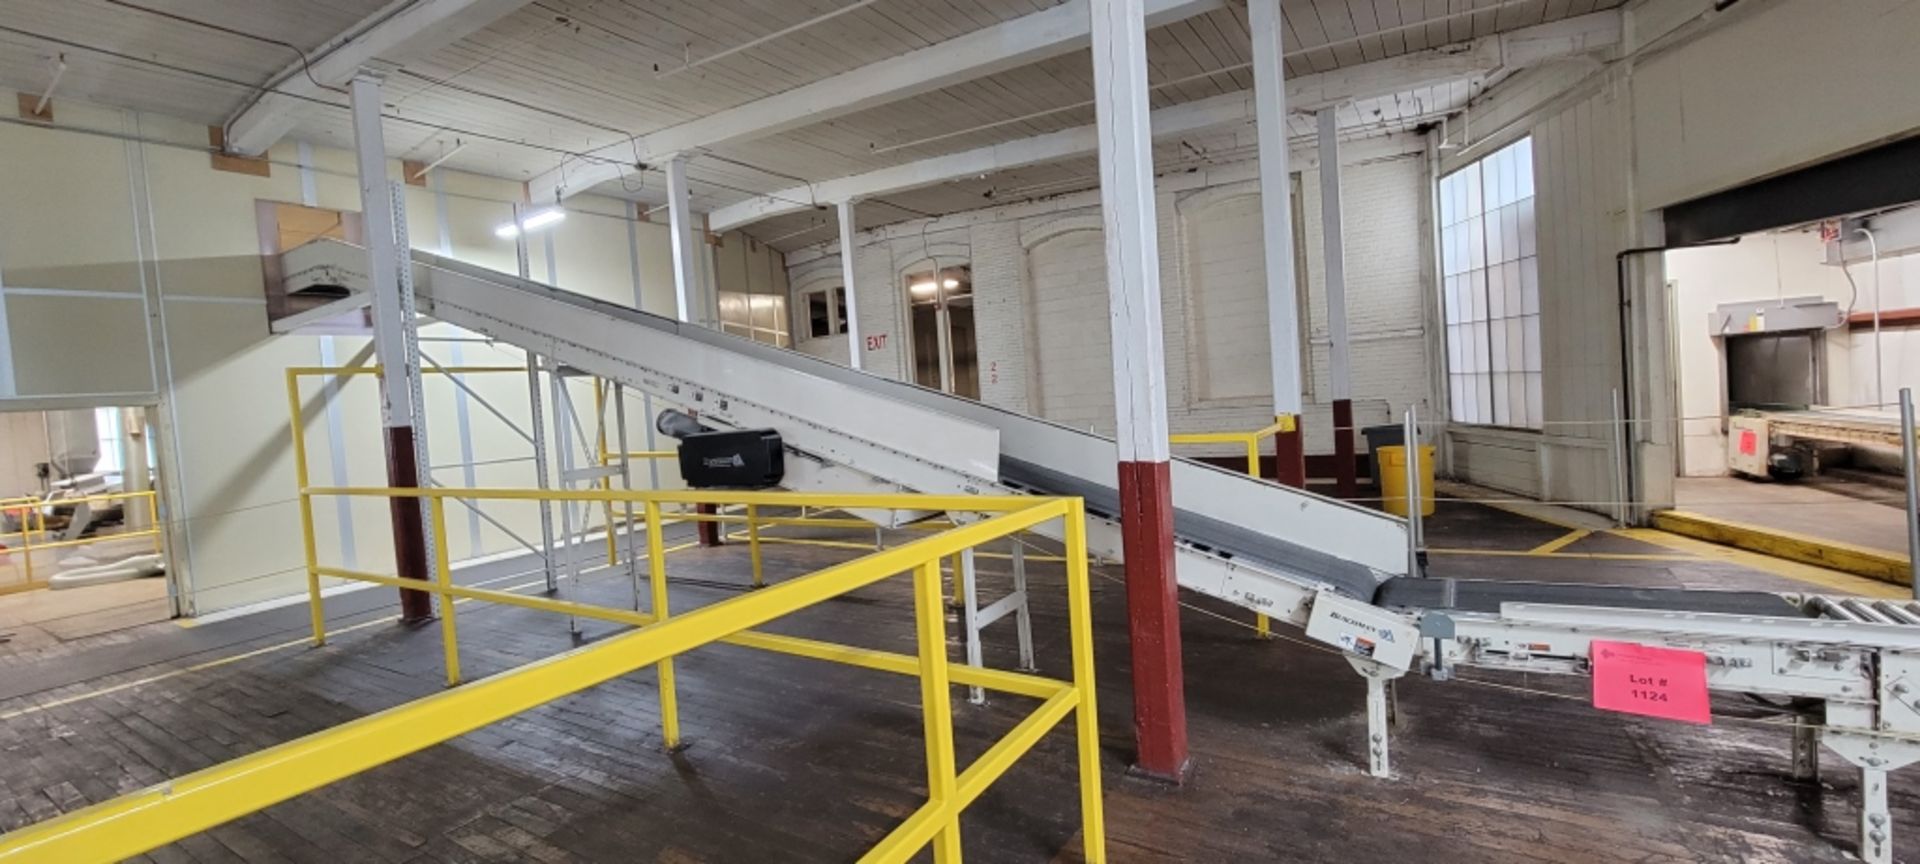 Buschman Inclined Conveyor System - BULK BID FOR LOTS 1118 TO 1125 - Image 11 of 12